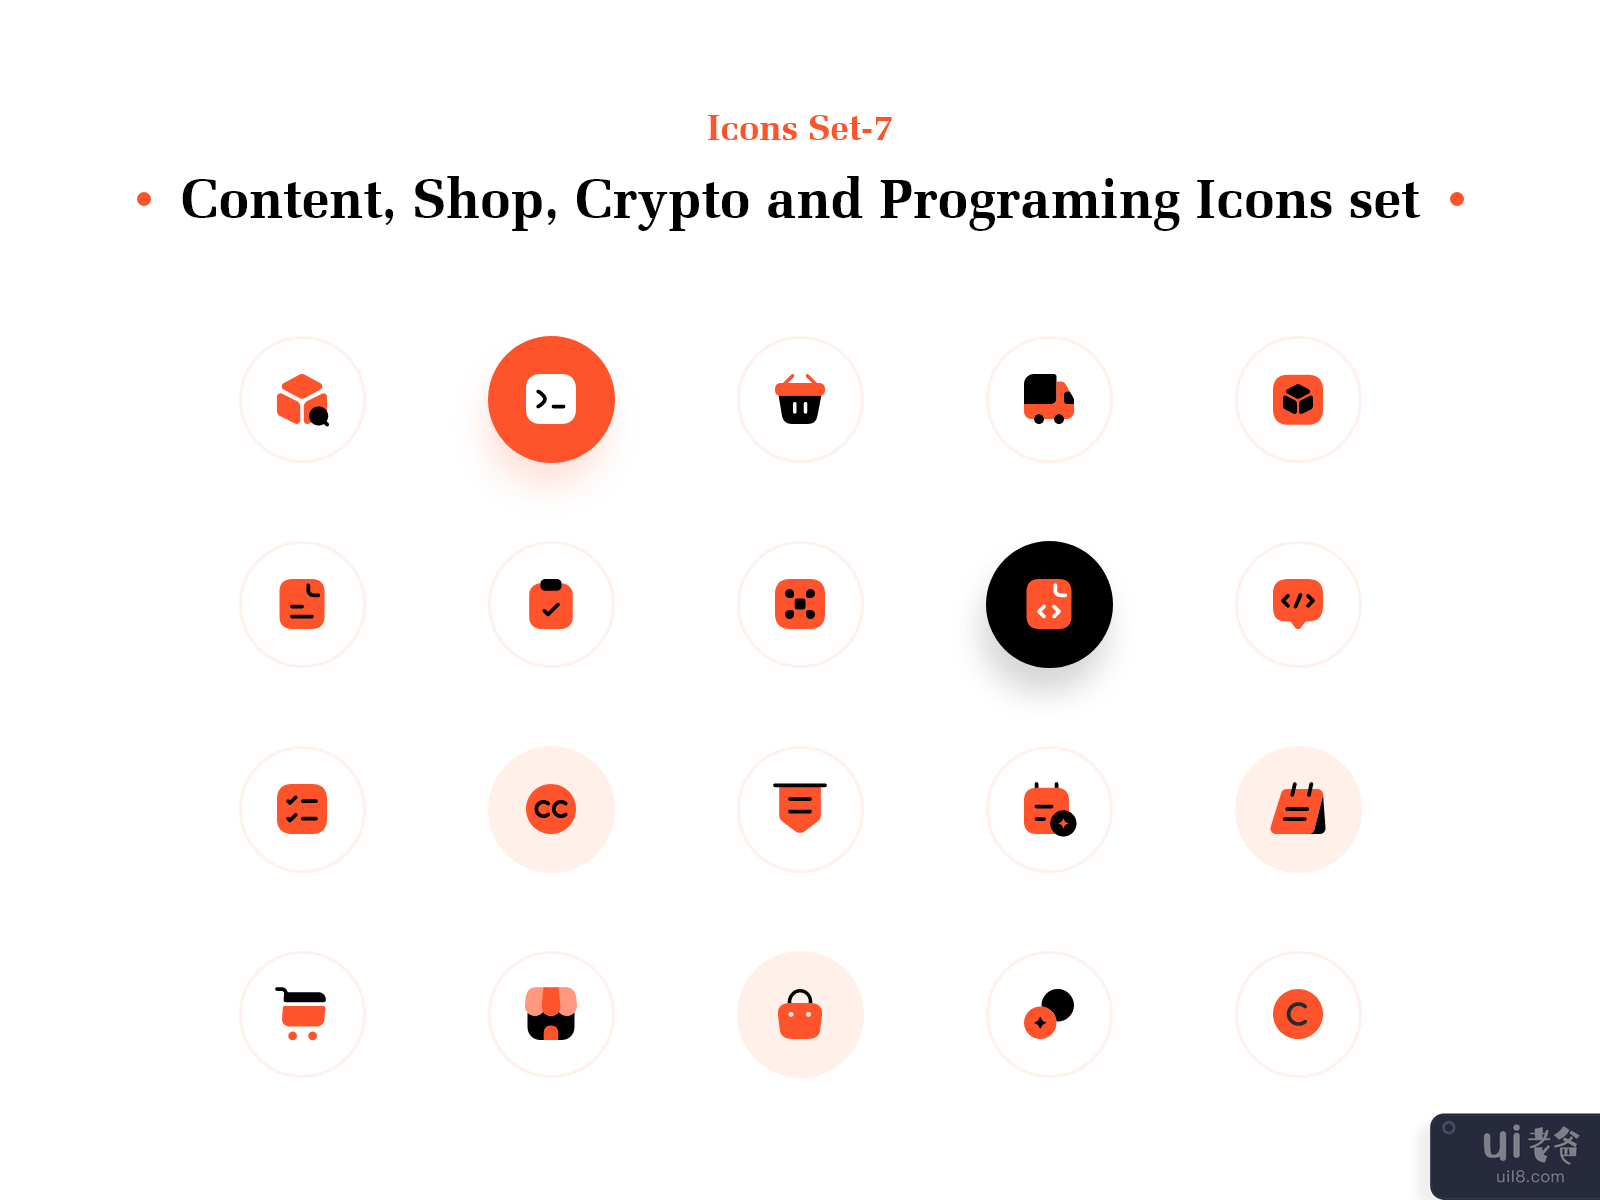 Content, Shop, Crypto and Programing Icons set(Content, Shop, Crypto and Programing Icons set)插图